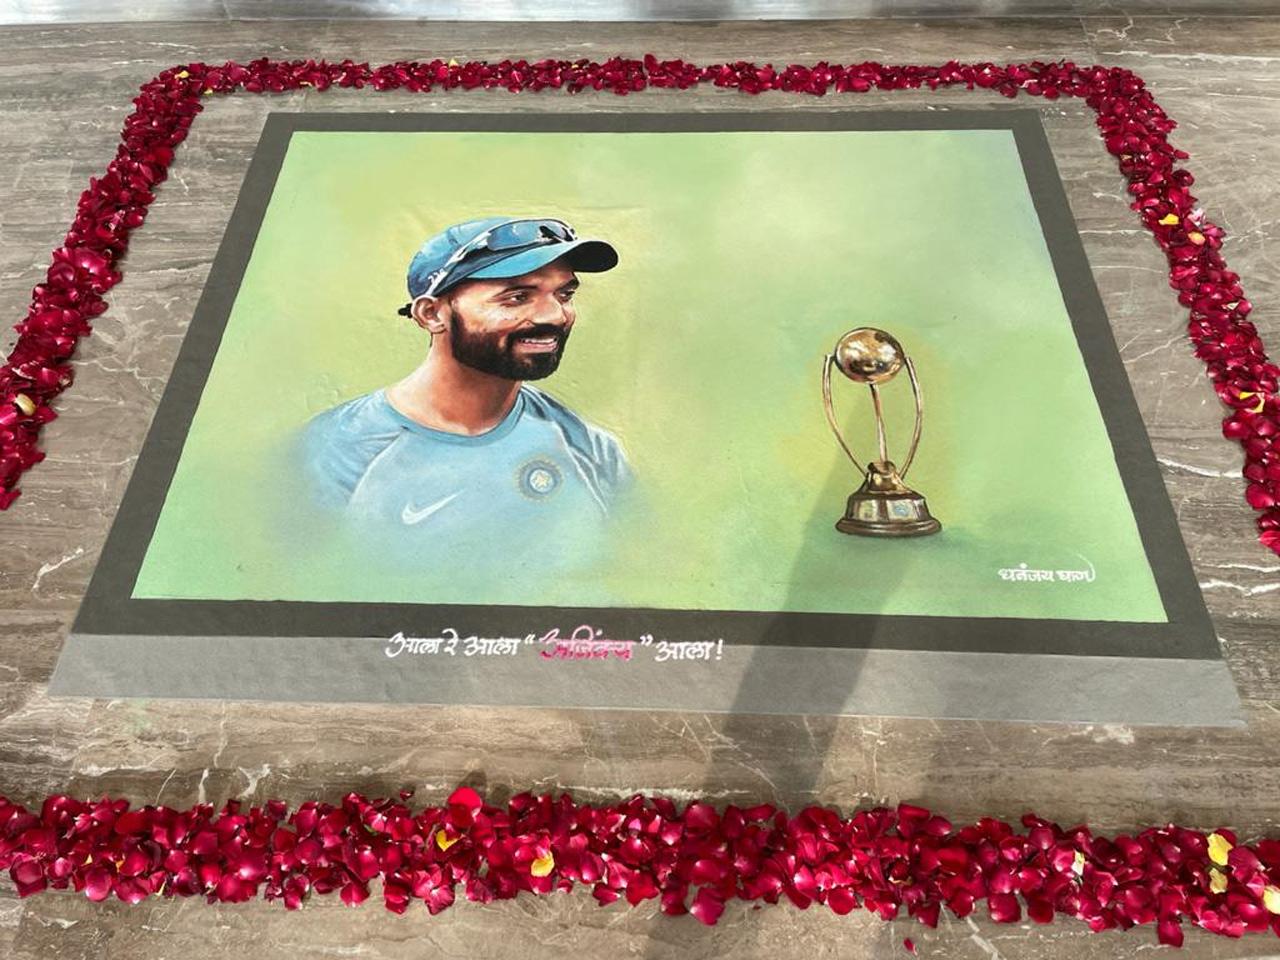 A cake was prepared by society members of the building where Ajinkya Rahane stays in Matunga in order to honour his achievements at the recently-concluded India tour of Australia. Picture/ mid-day reader Shripal Sangvi